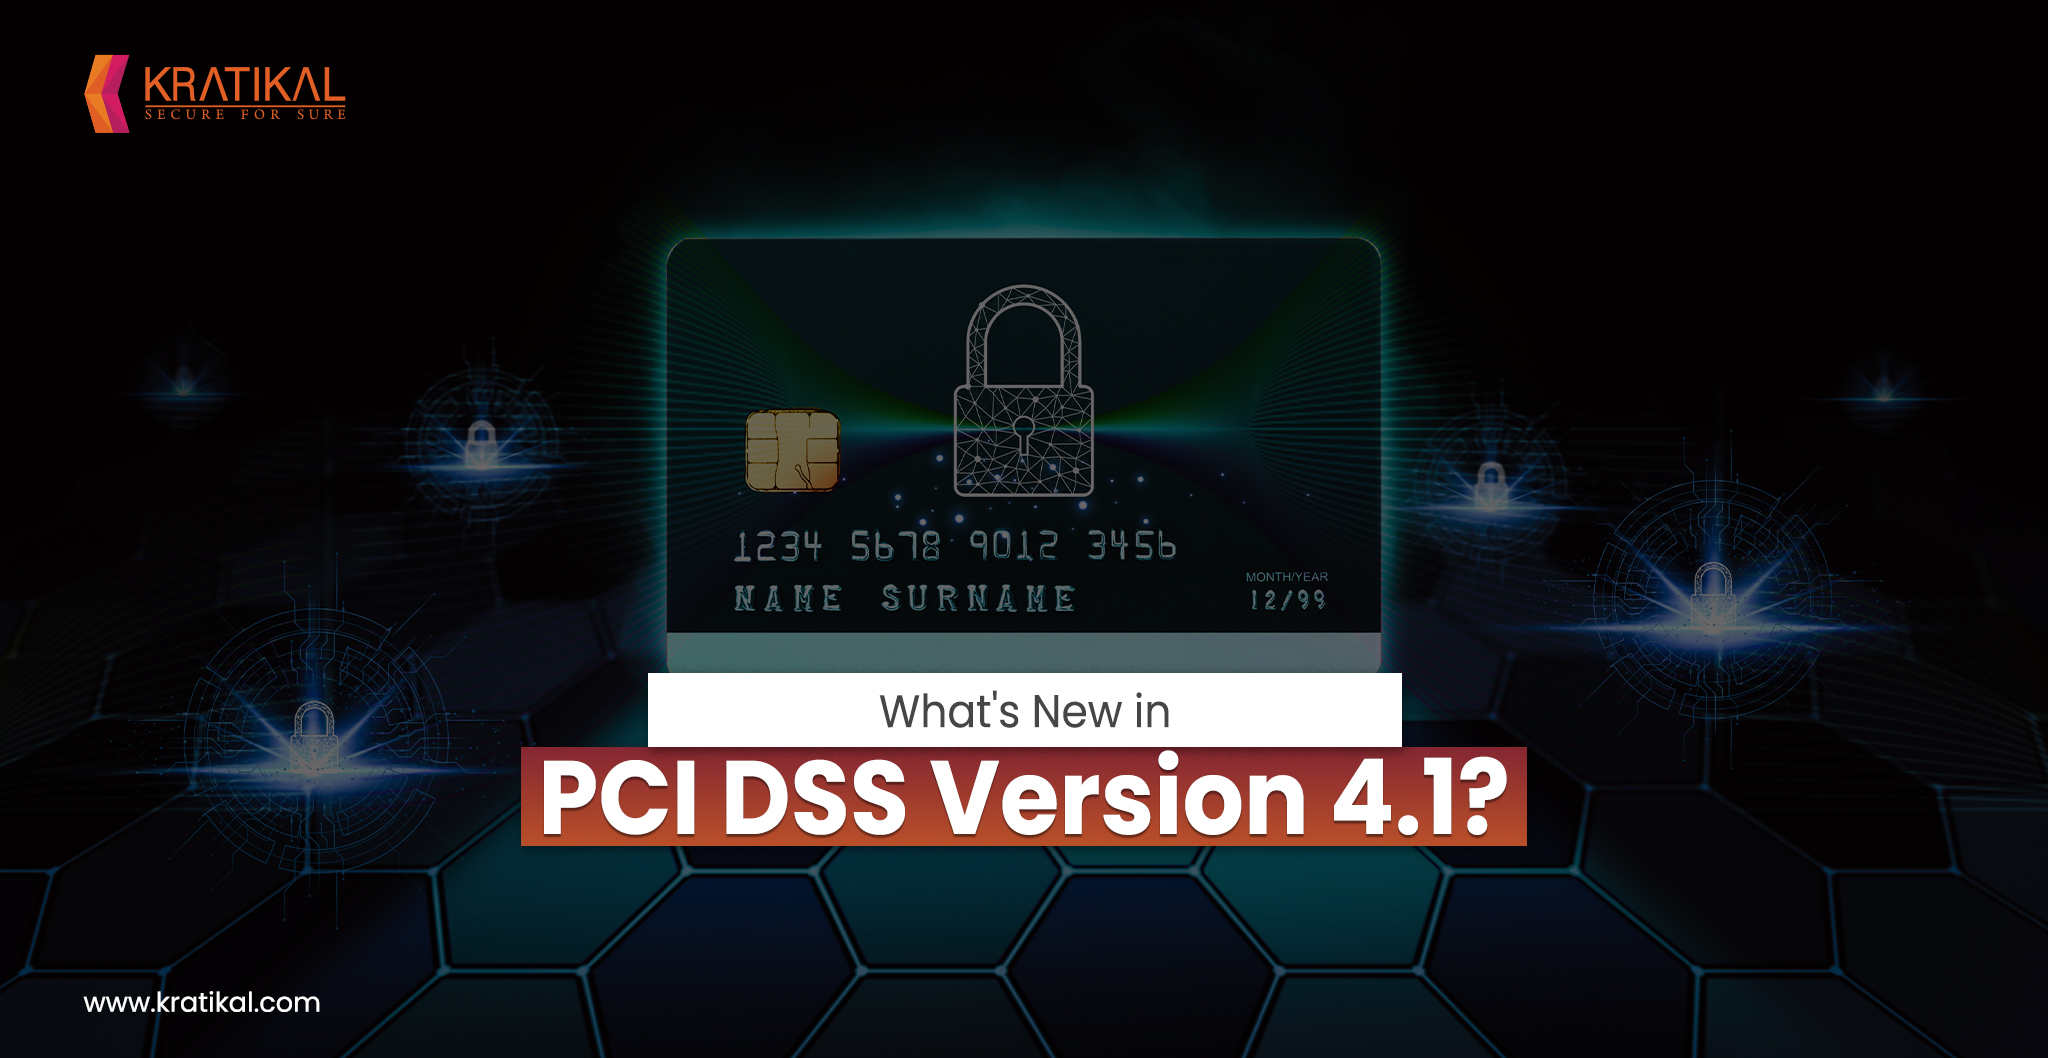 What's New in PCI DSS Version 4.1?